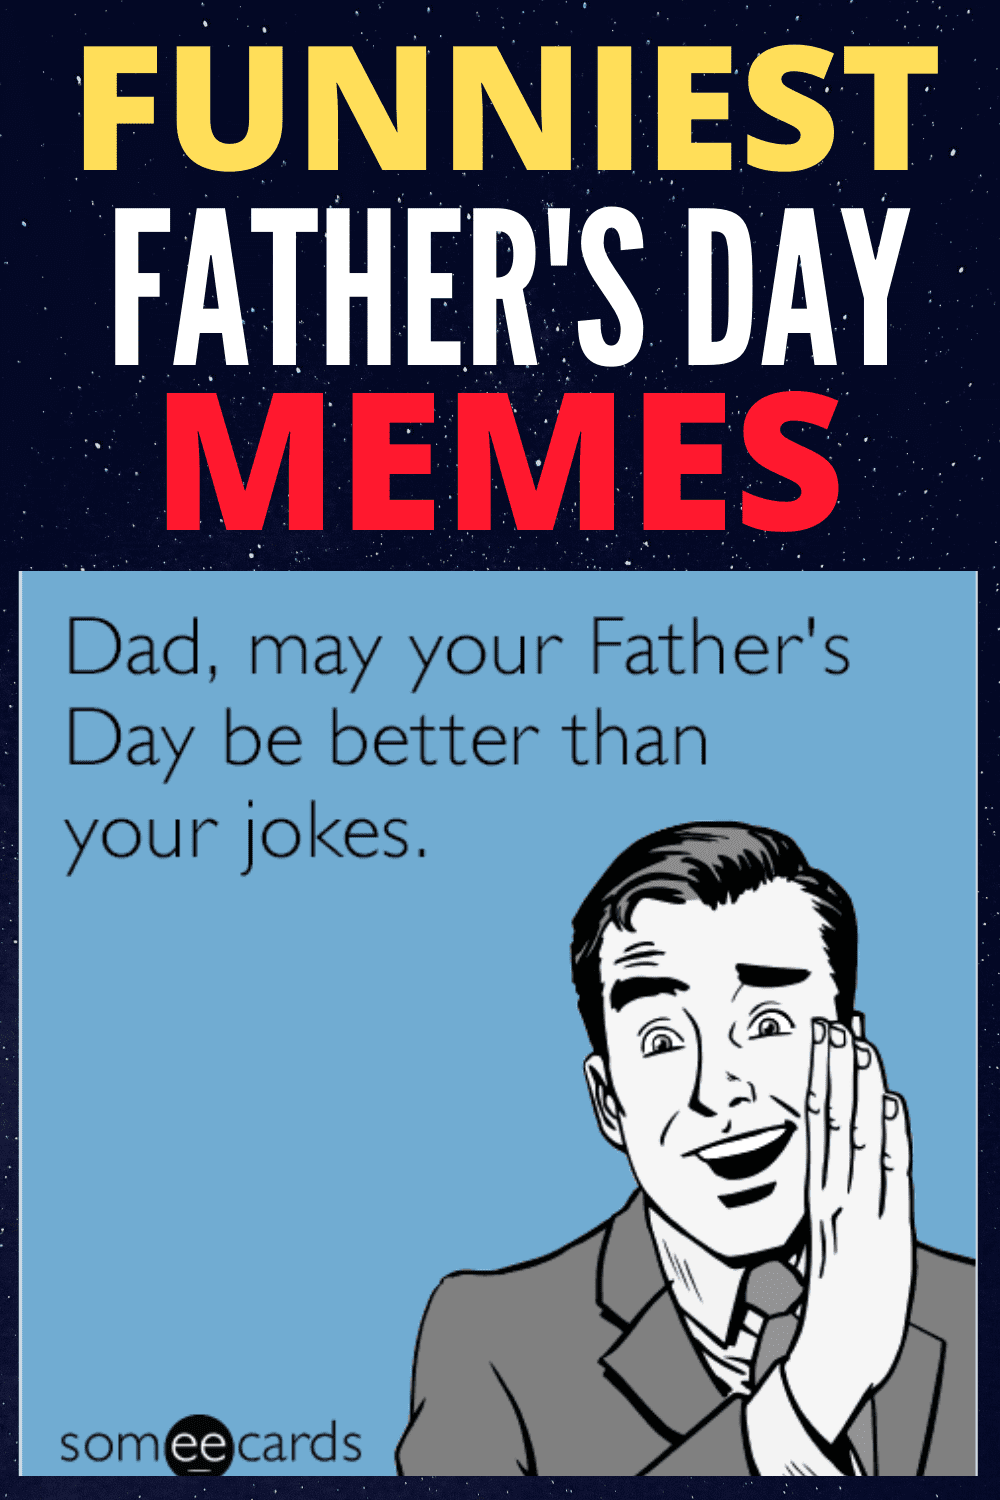 Funniest Father’s Day Memes HD Wallpaper